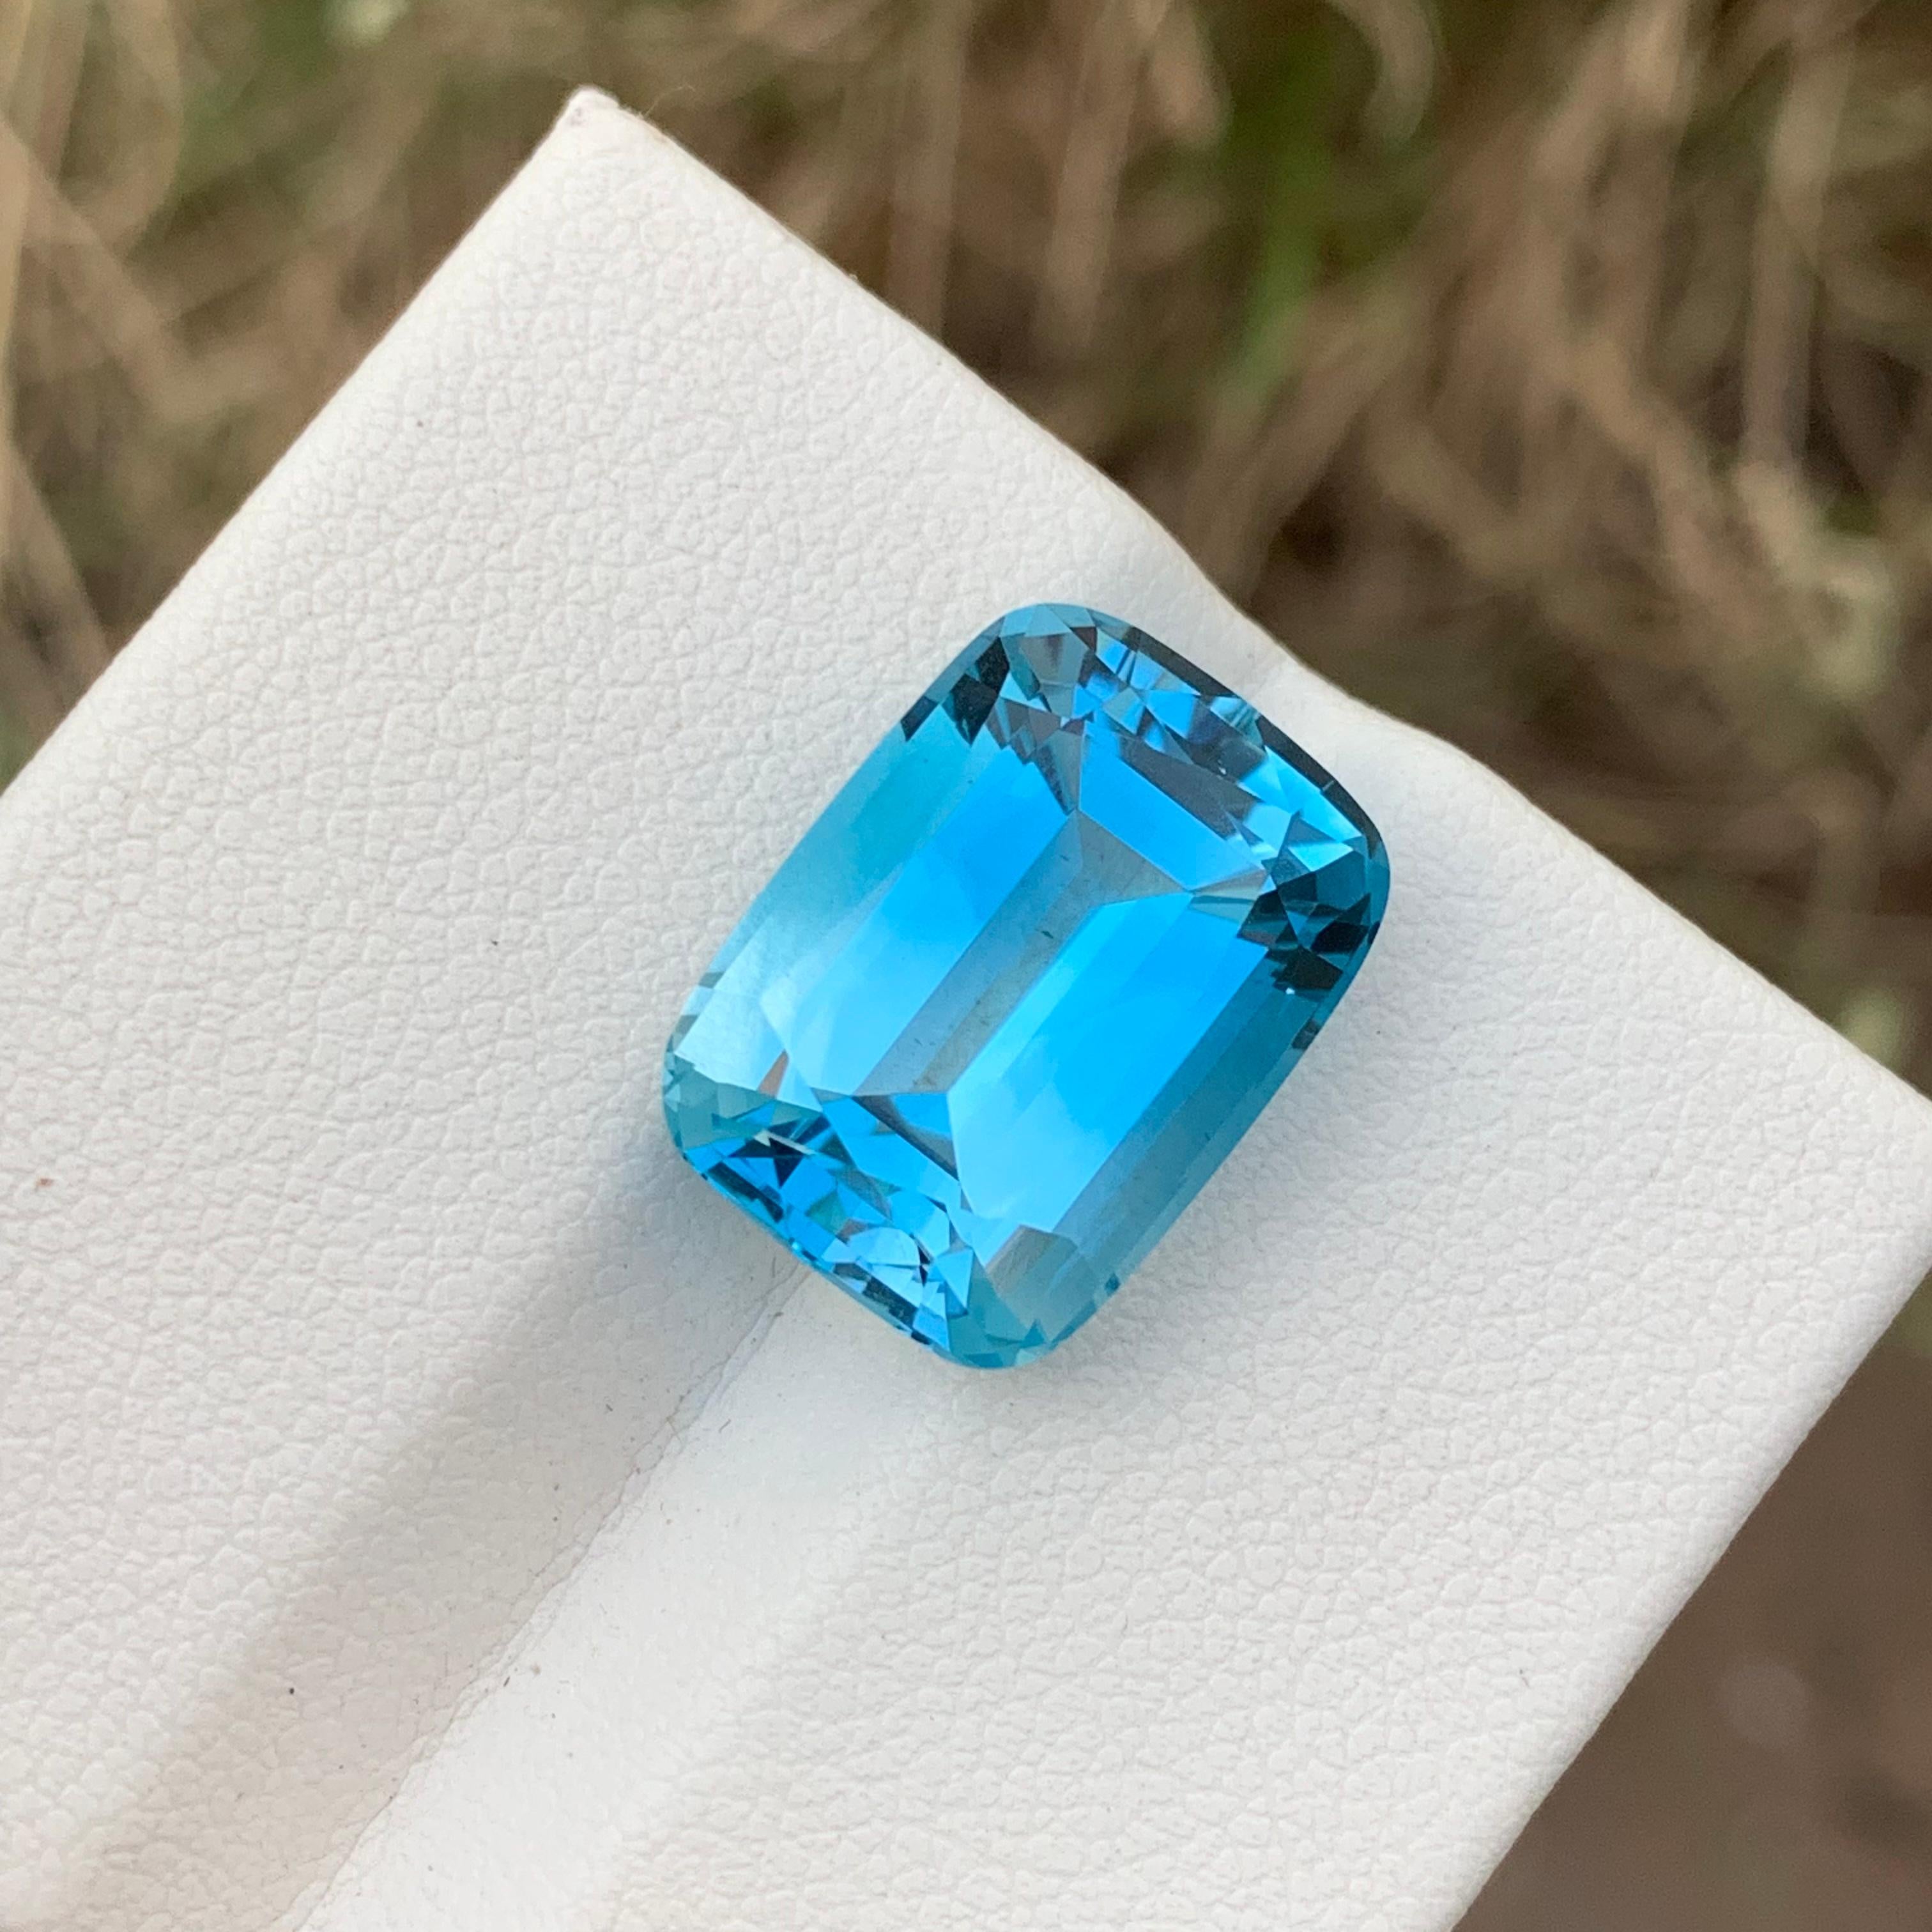 Gorgeous 14.95 Cts Faceted Blue Topaz Gemstone Long Cushion Cut From Brazil Mine For Sale 3